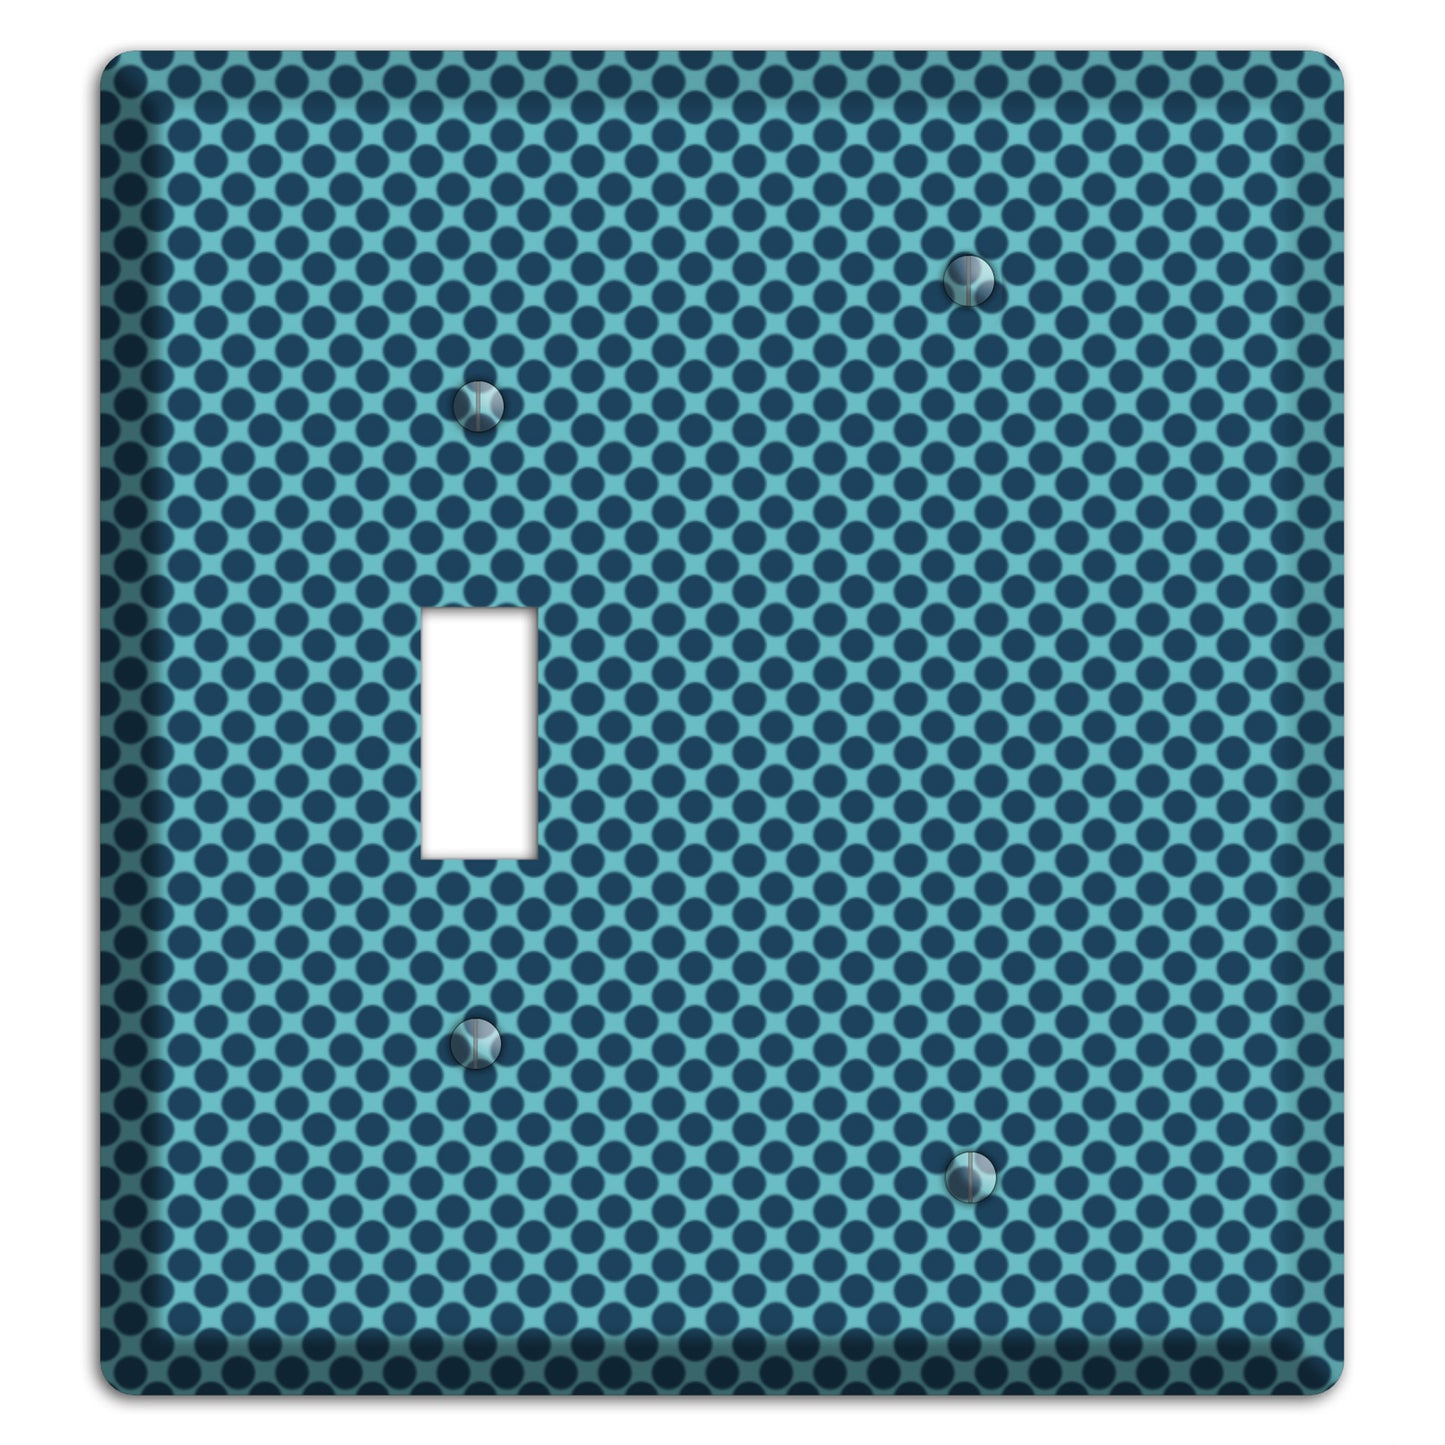 Turquoise with Blue Packed Polka Dots Toggle / Blank Wallplate